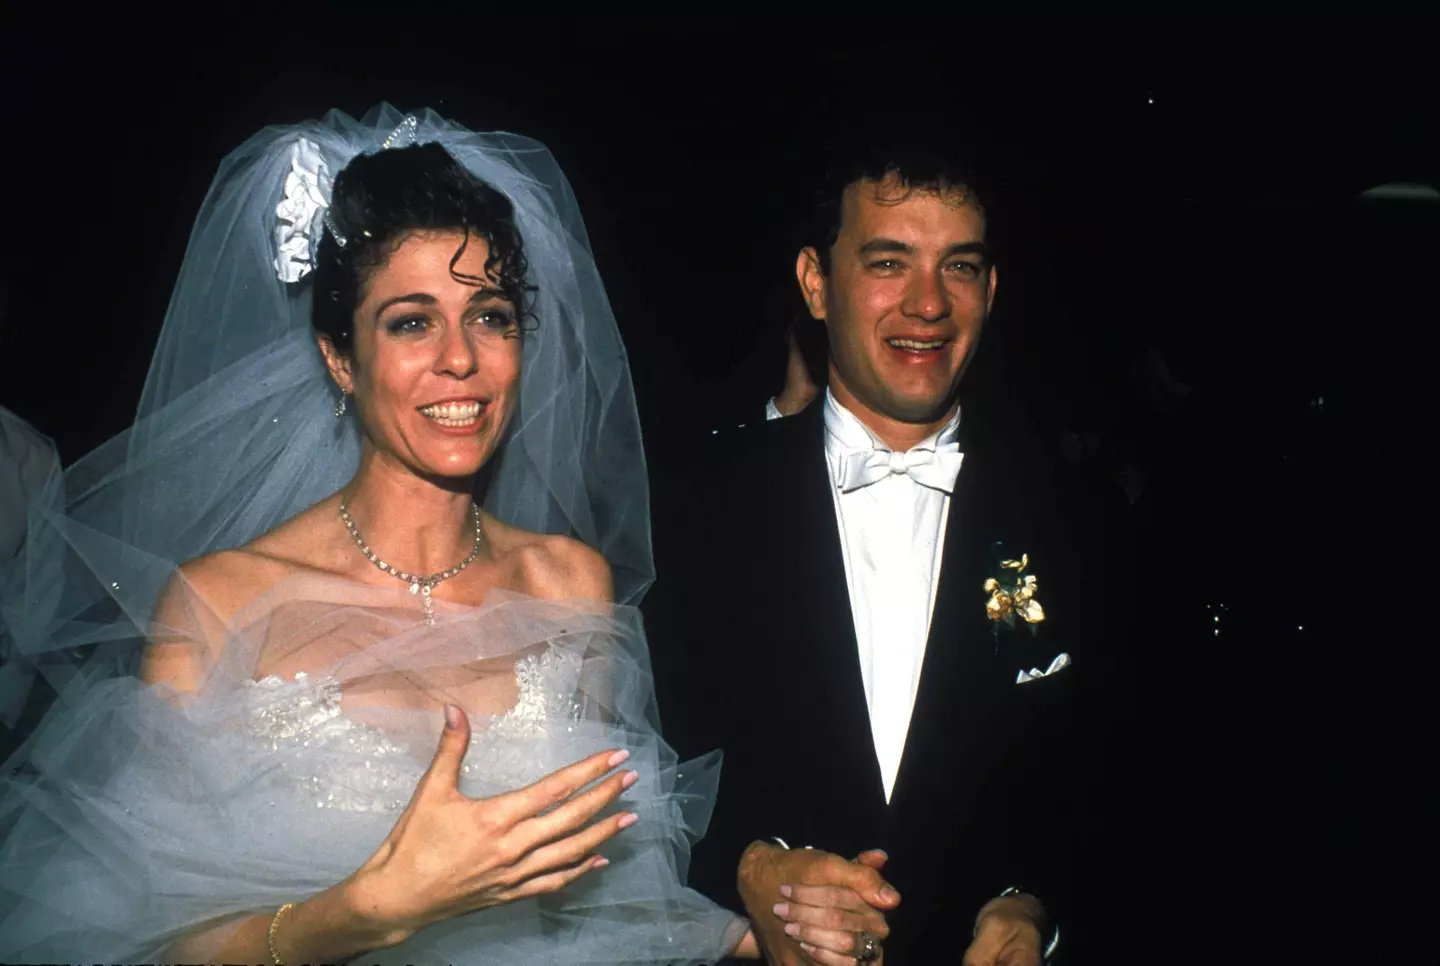 The Hollywood couple got married in 1988.